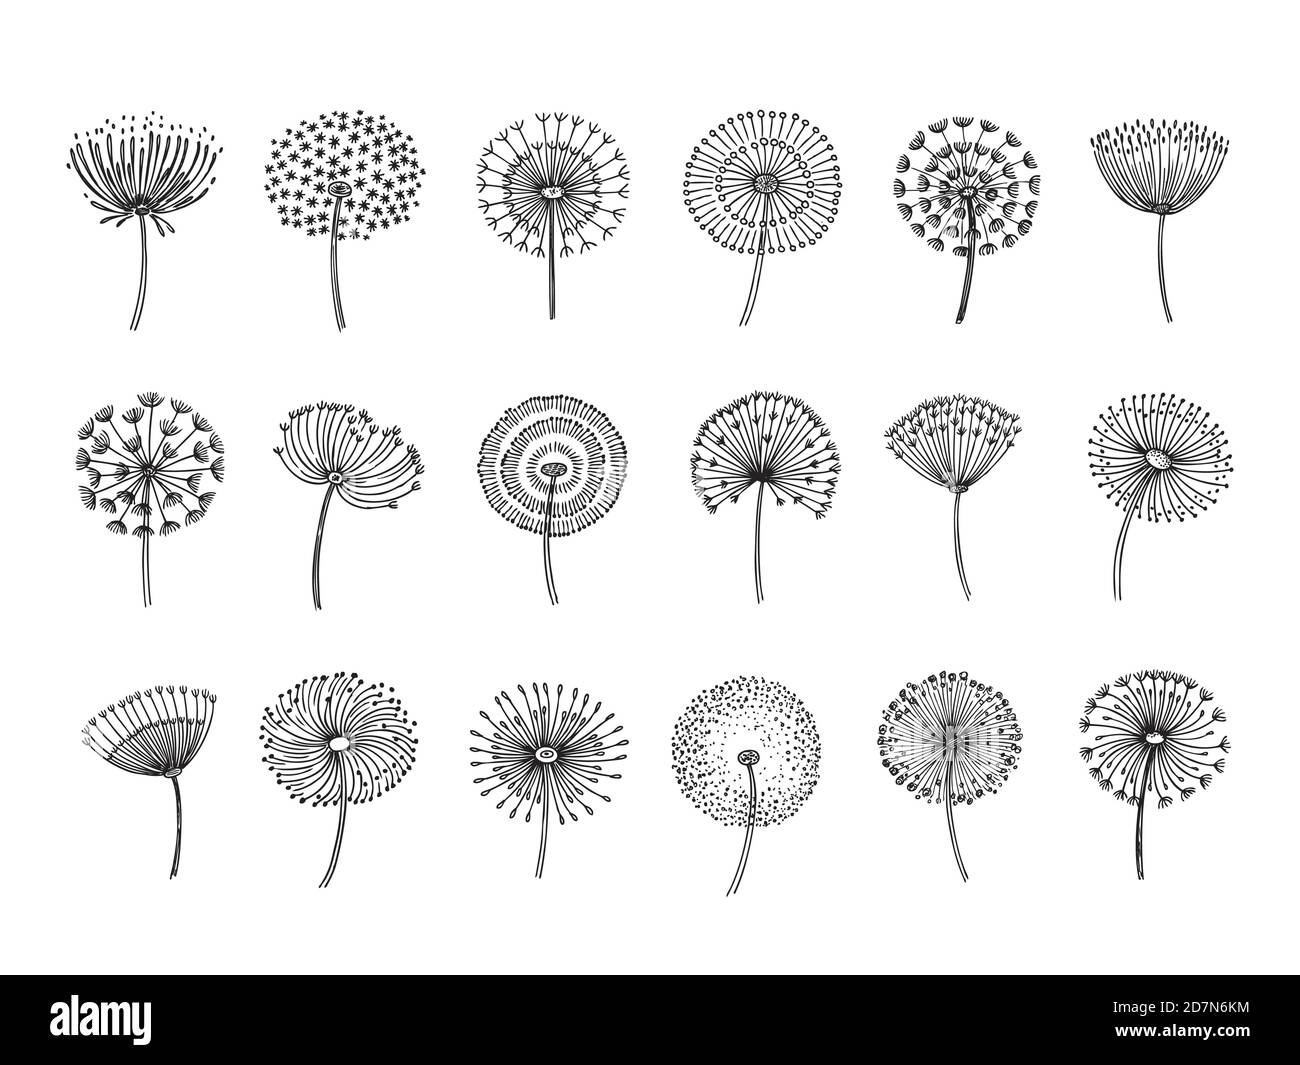 Dandelion set. Doodle hand drawn dandelions monstera delicate plant seeds summer botanical fluff flower isolated vector silhouettes. Illustration of dandelion fluff, botanical flower softness Stock Vector